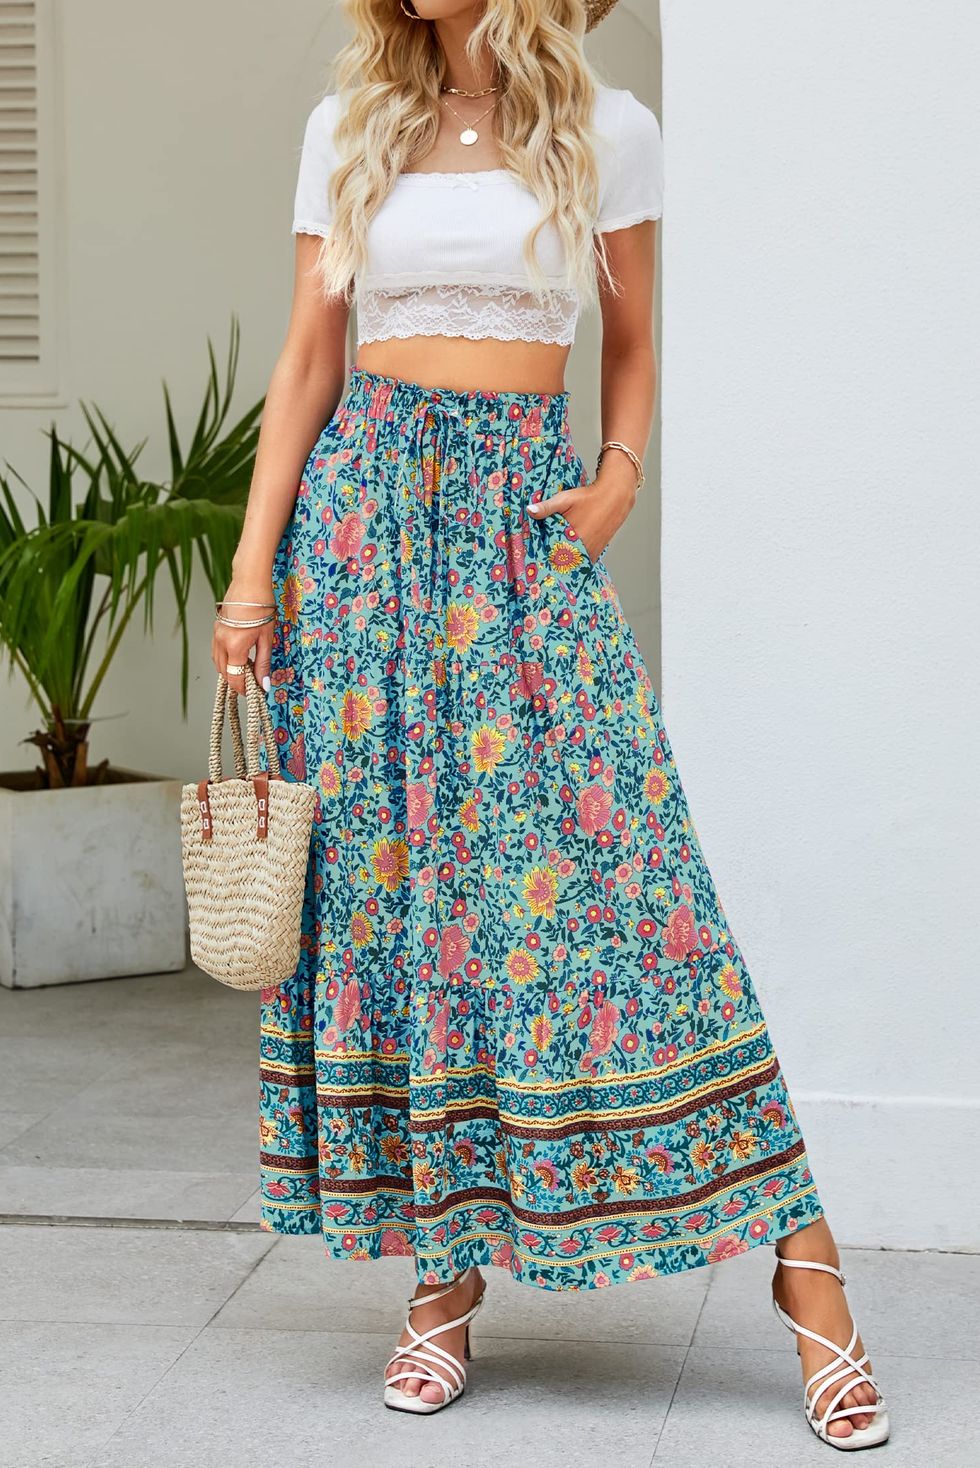 casual skirt and top outfit ideas for summer, summer skirts 2023